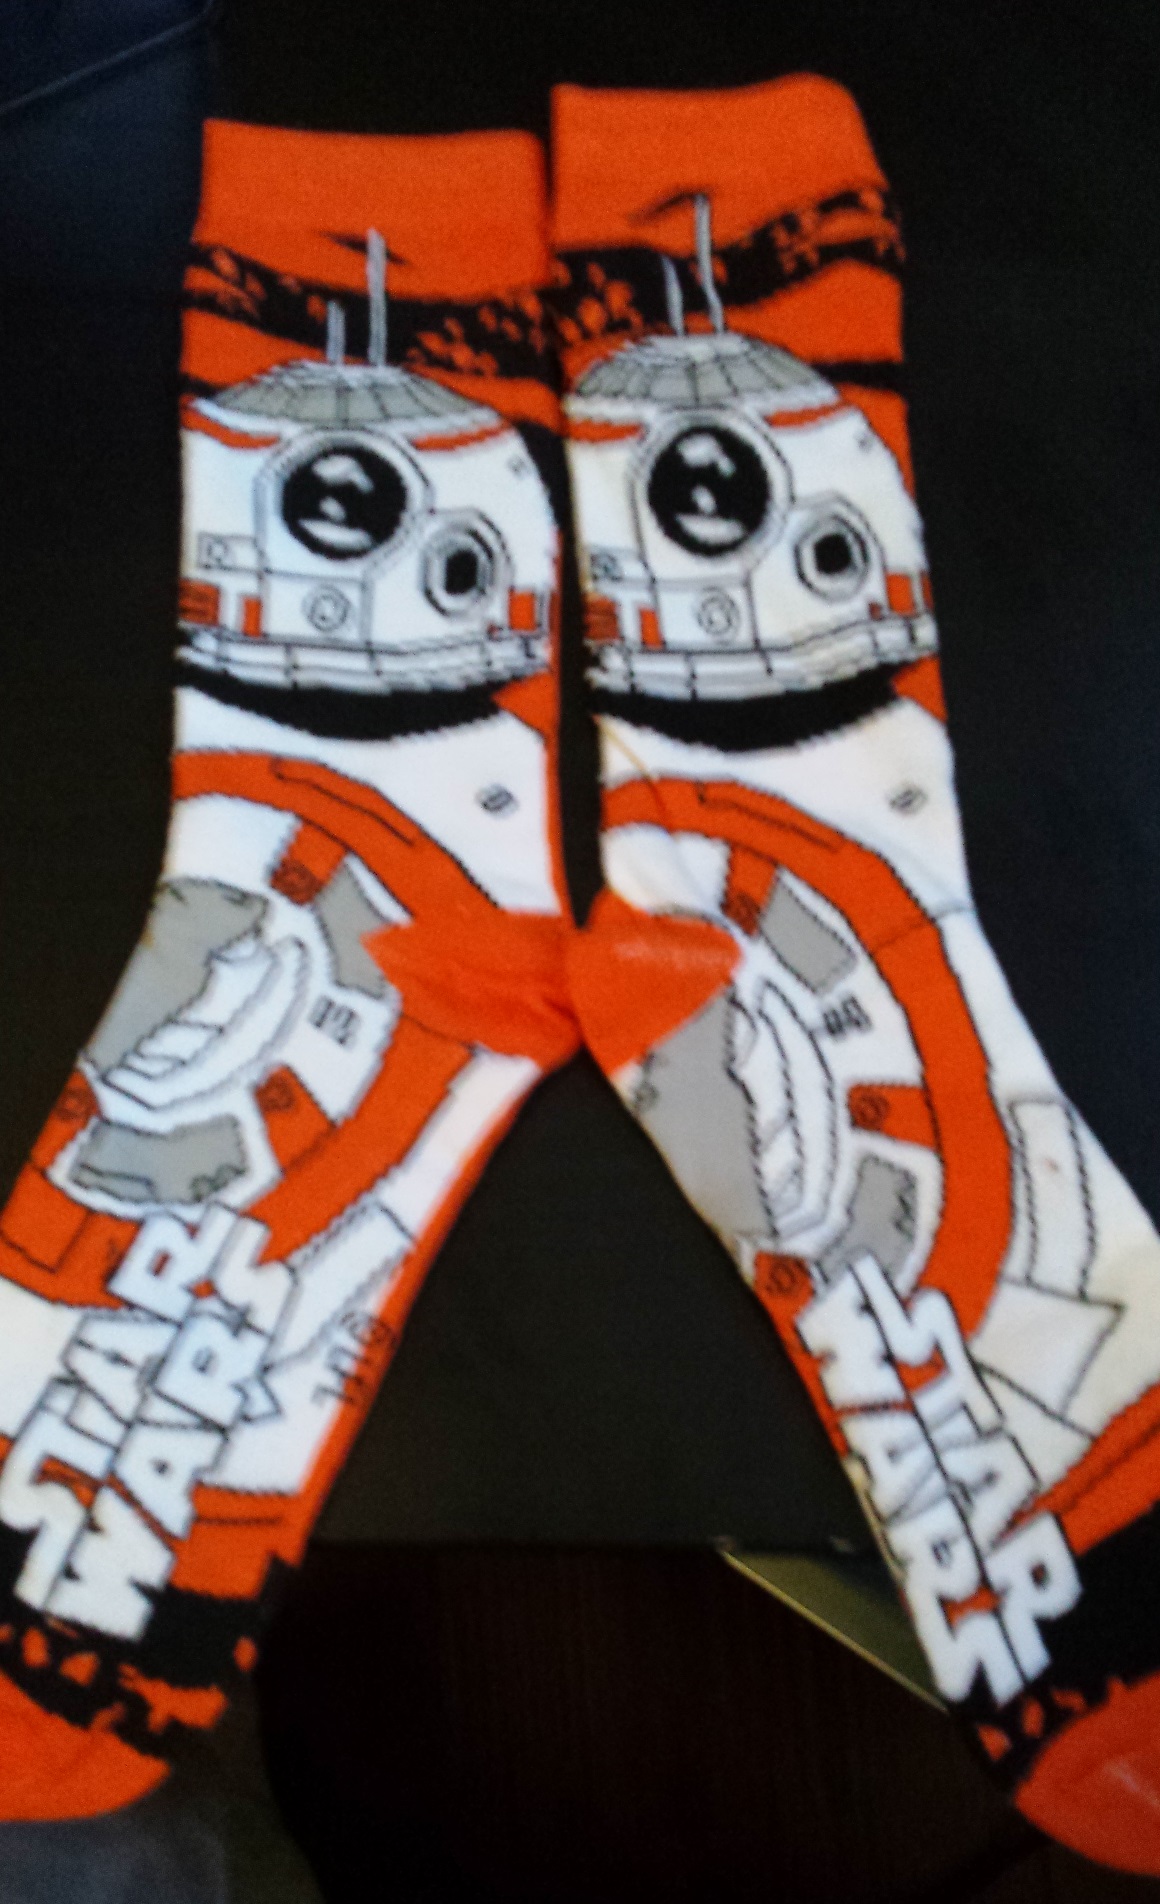 Bb-8 socks, star wars, loot crate, loot crate review, december loot crate, discovery loot crate